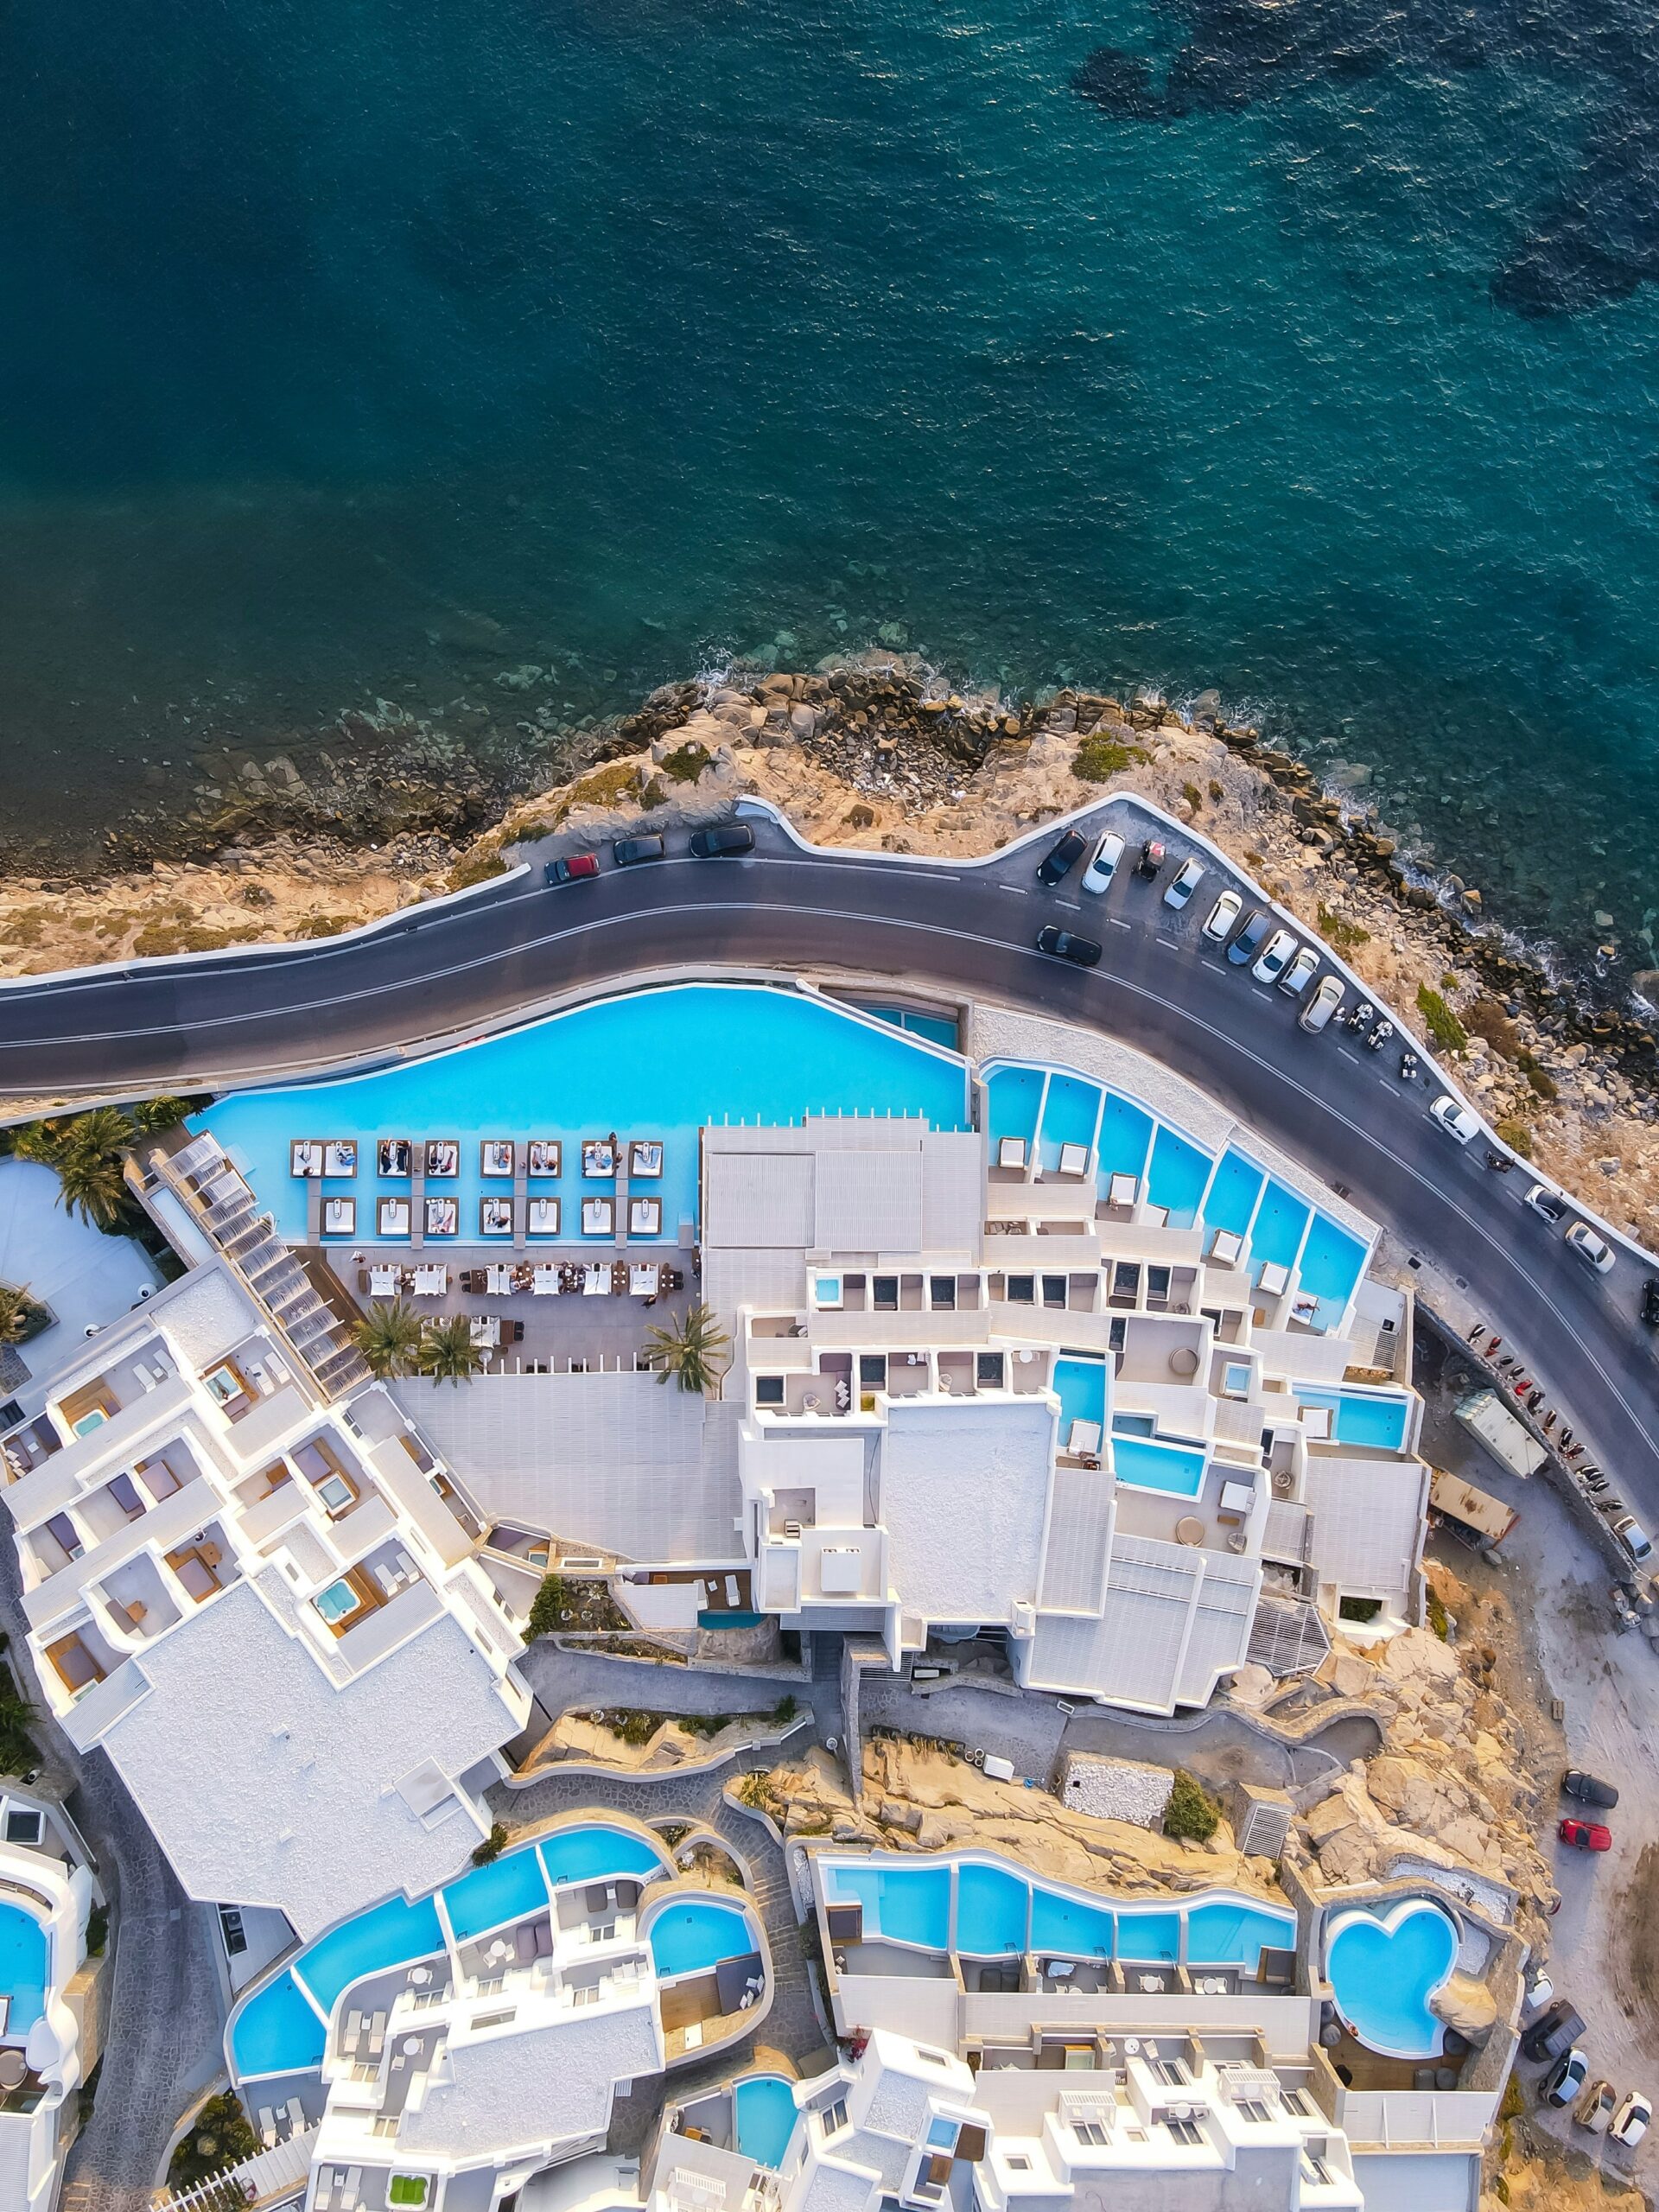 A birds-eye view captures the elegant curves of a luxury hotel's pools alongside the tranquil Mediterranean Sea.